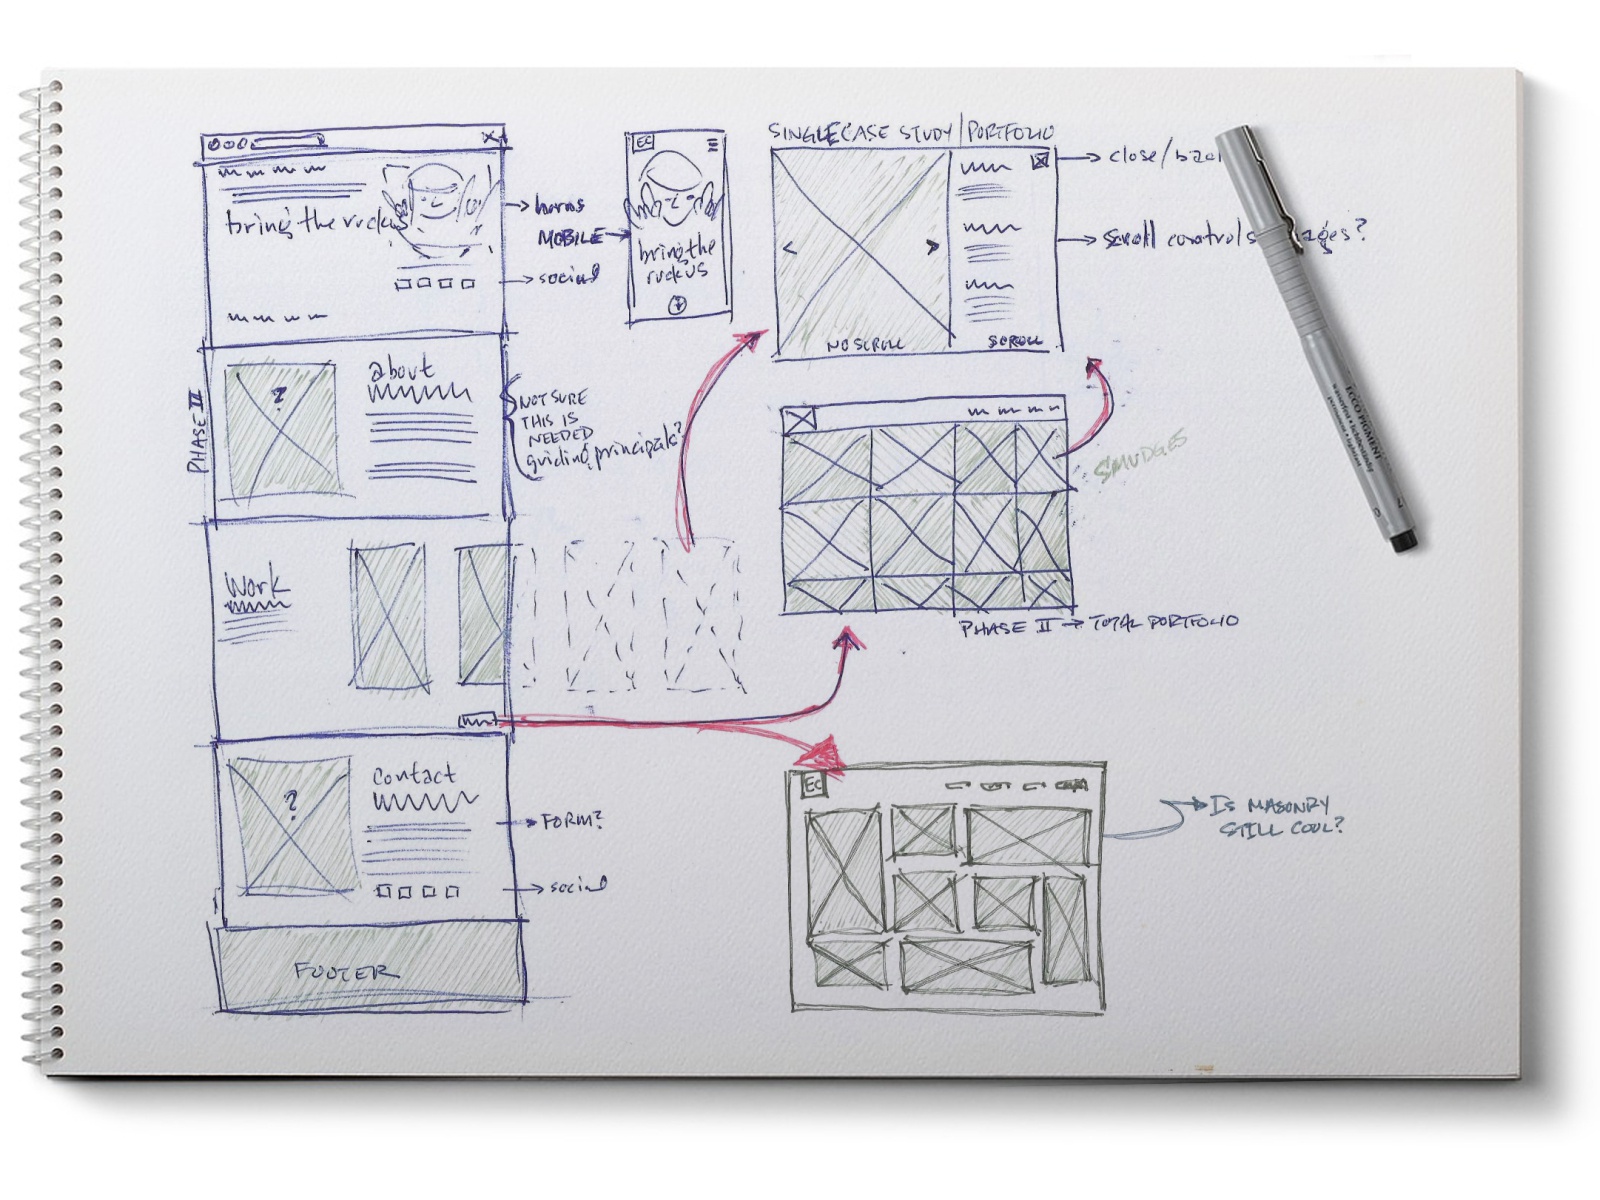 not a real desktop wireframe